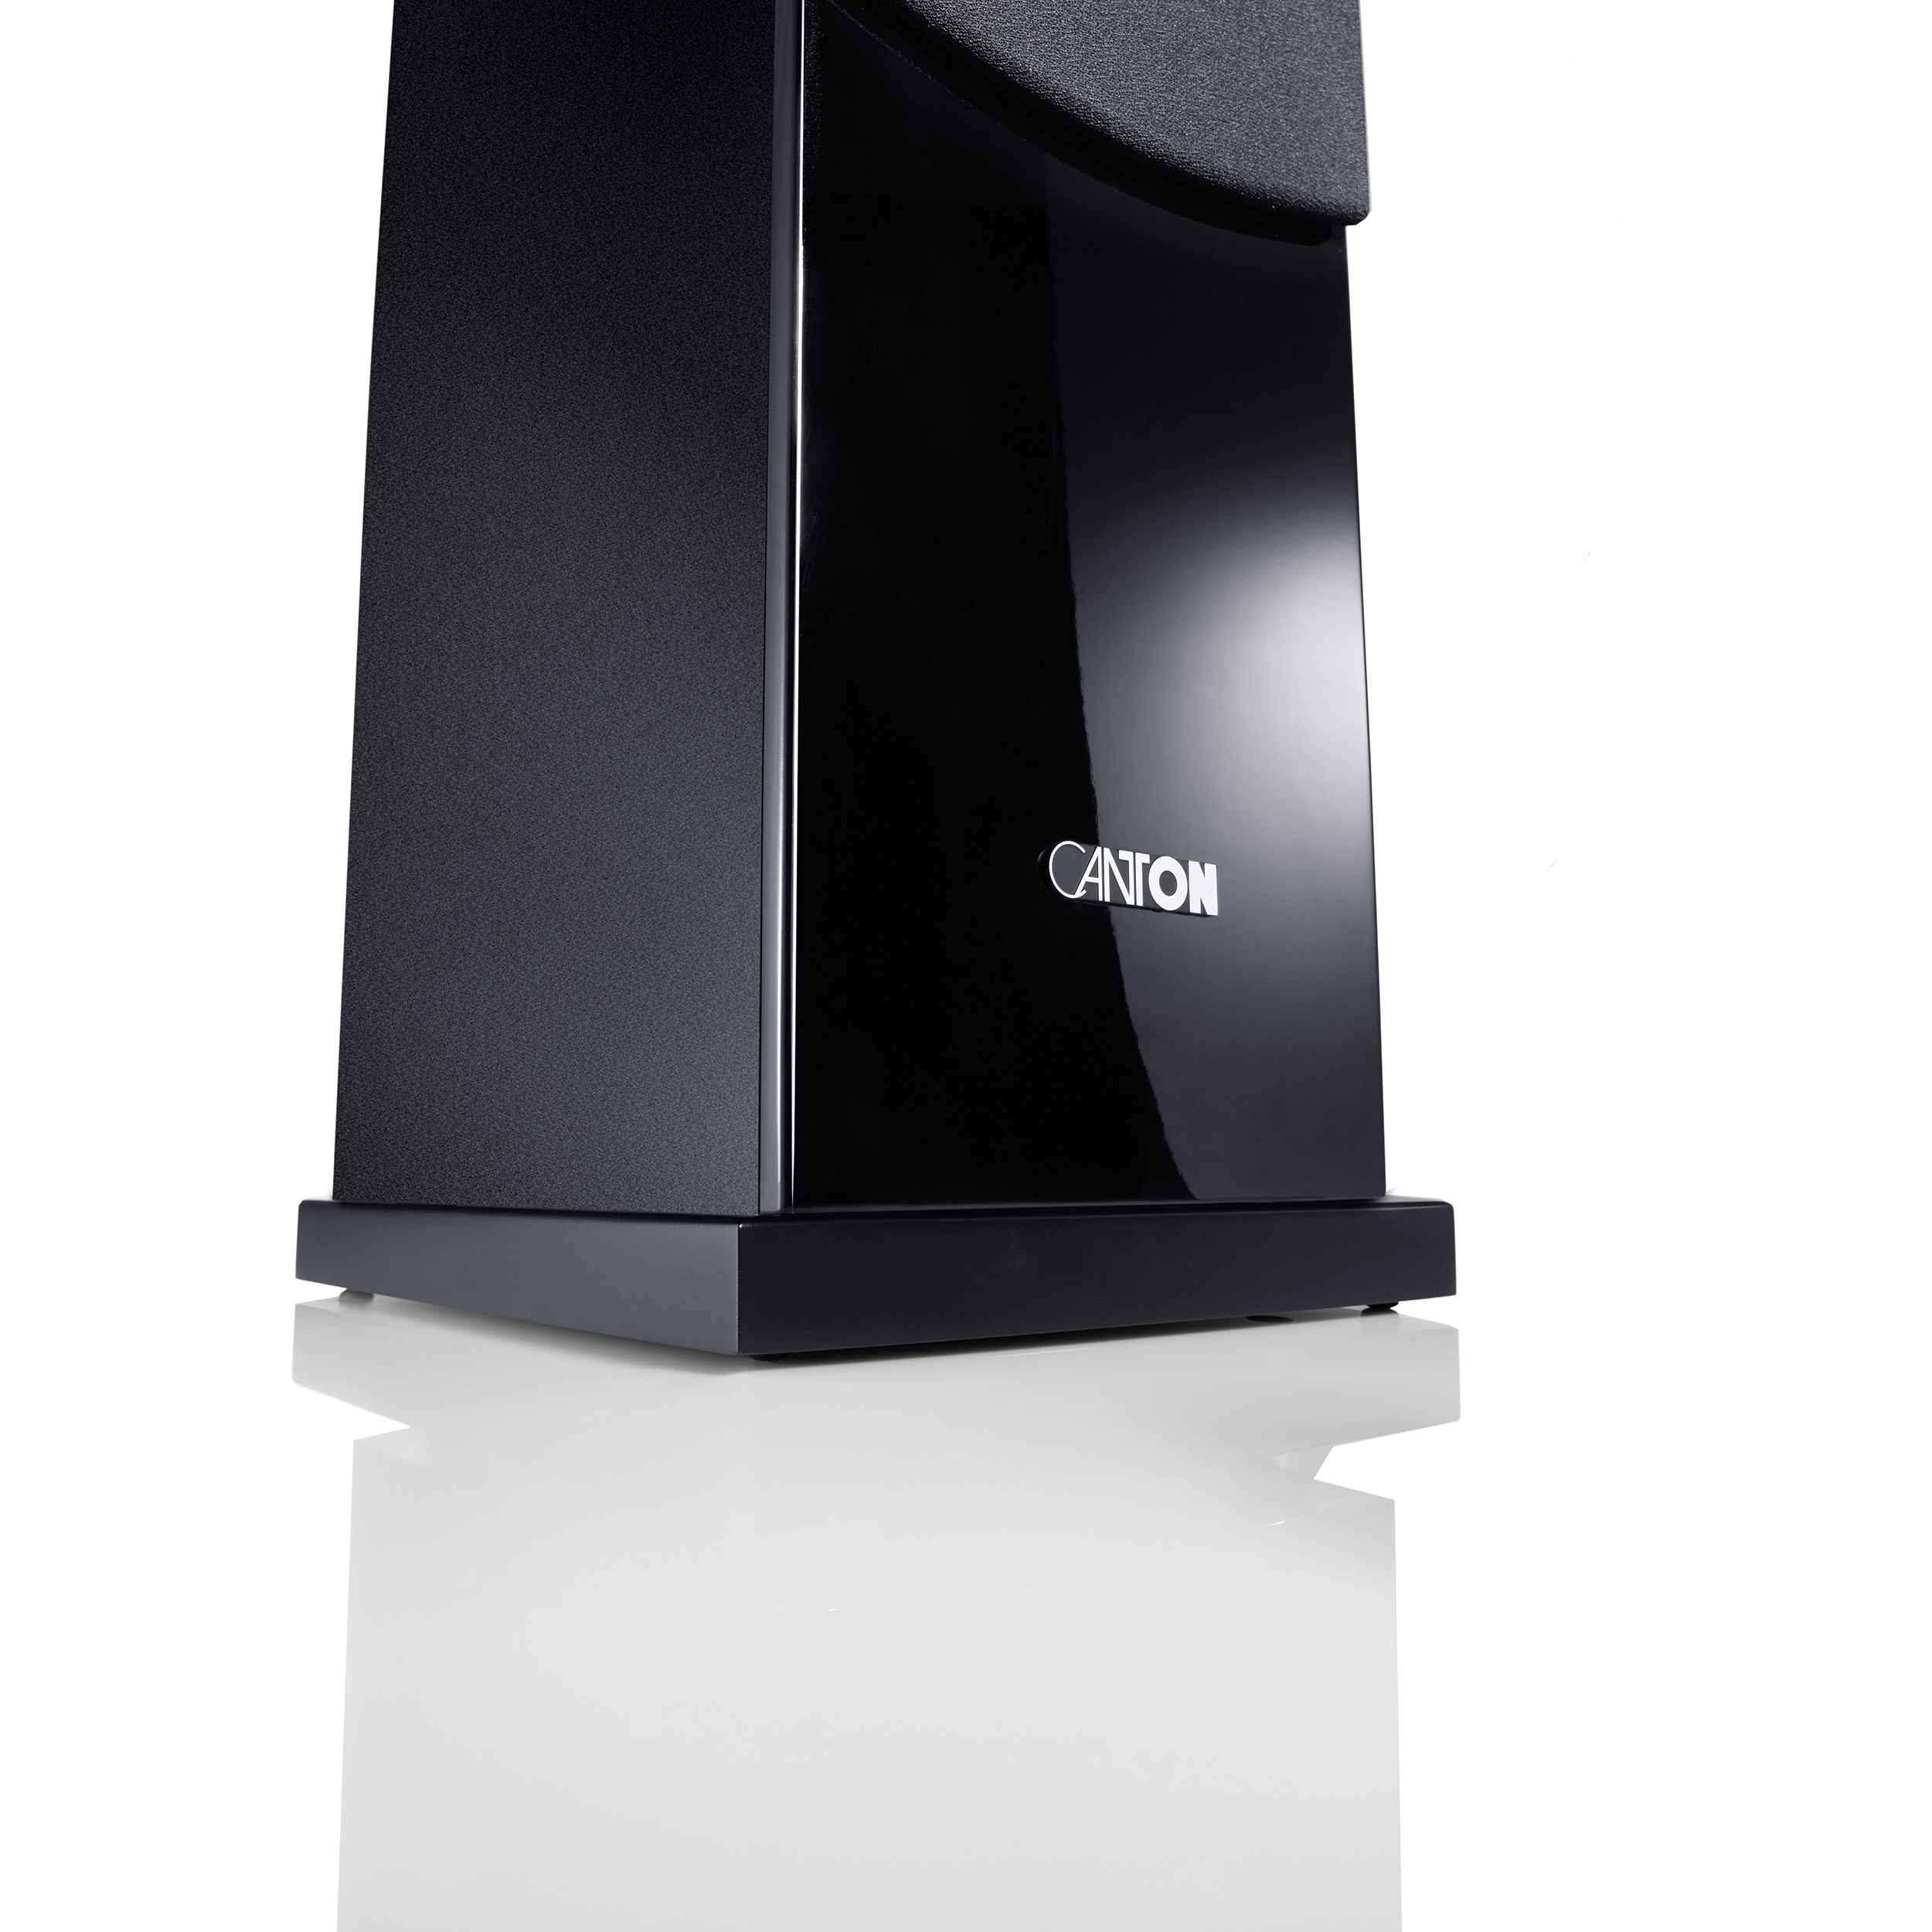 CANTON CHRONO 90 DC - (PAIR) SPEAKER and Sound | RIO STAND FLOOR Vision CANTON